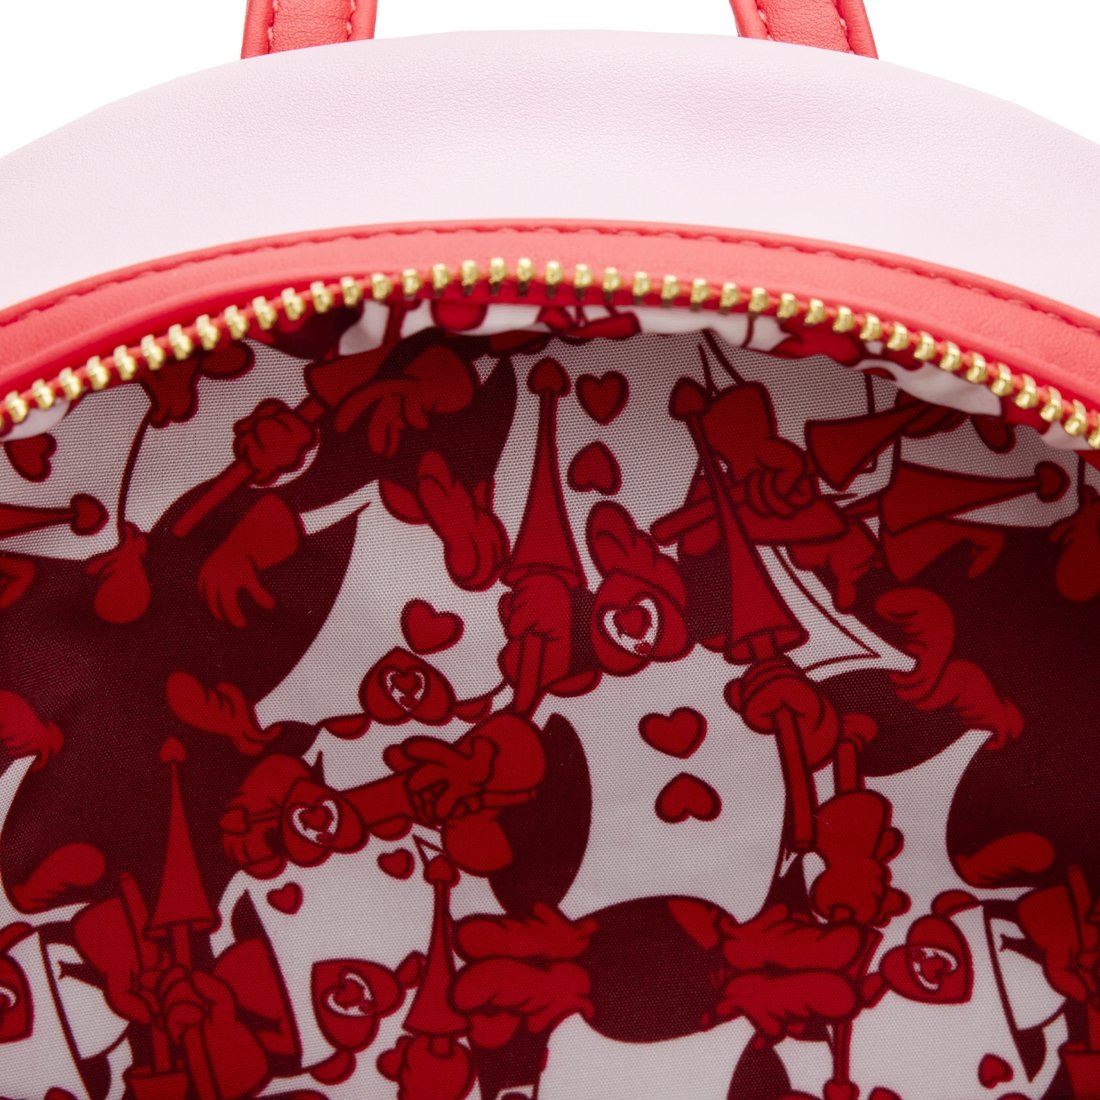 Alice in Wonderland Painting the Roses Red Mini Backpack - Rockamilly-Bags & Purses-Vintage